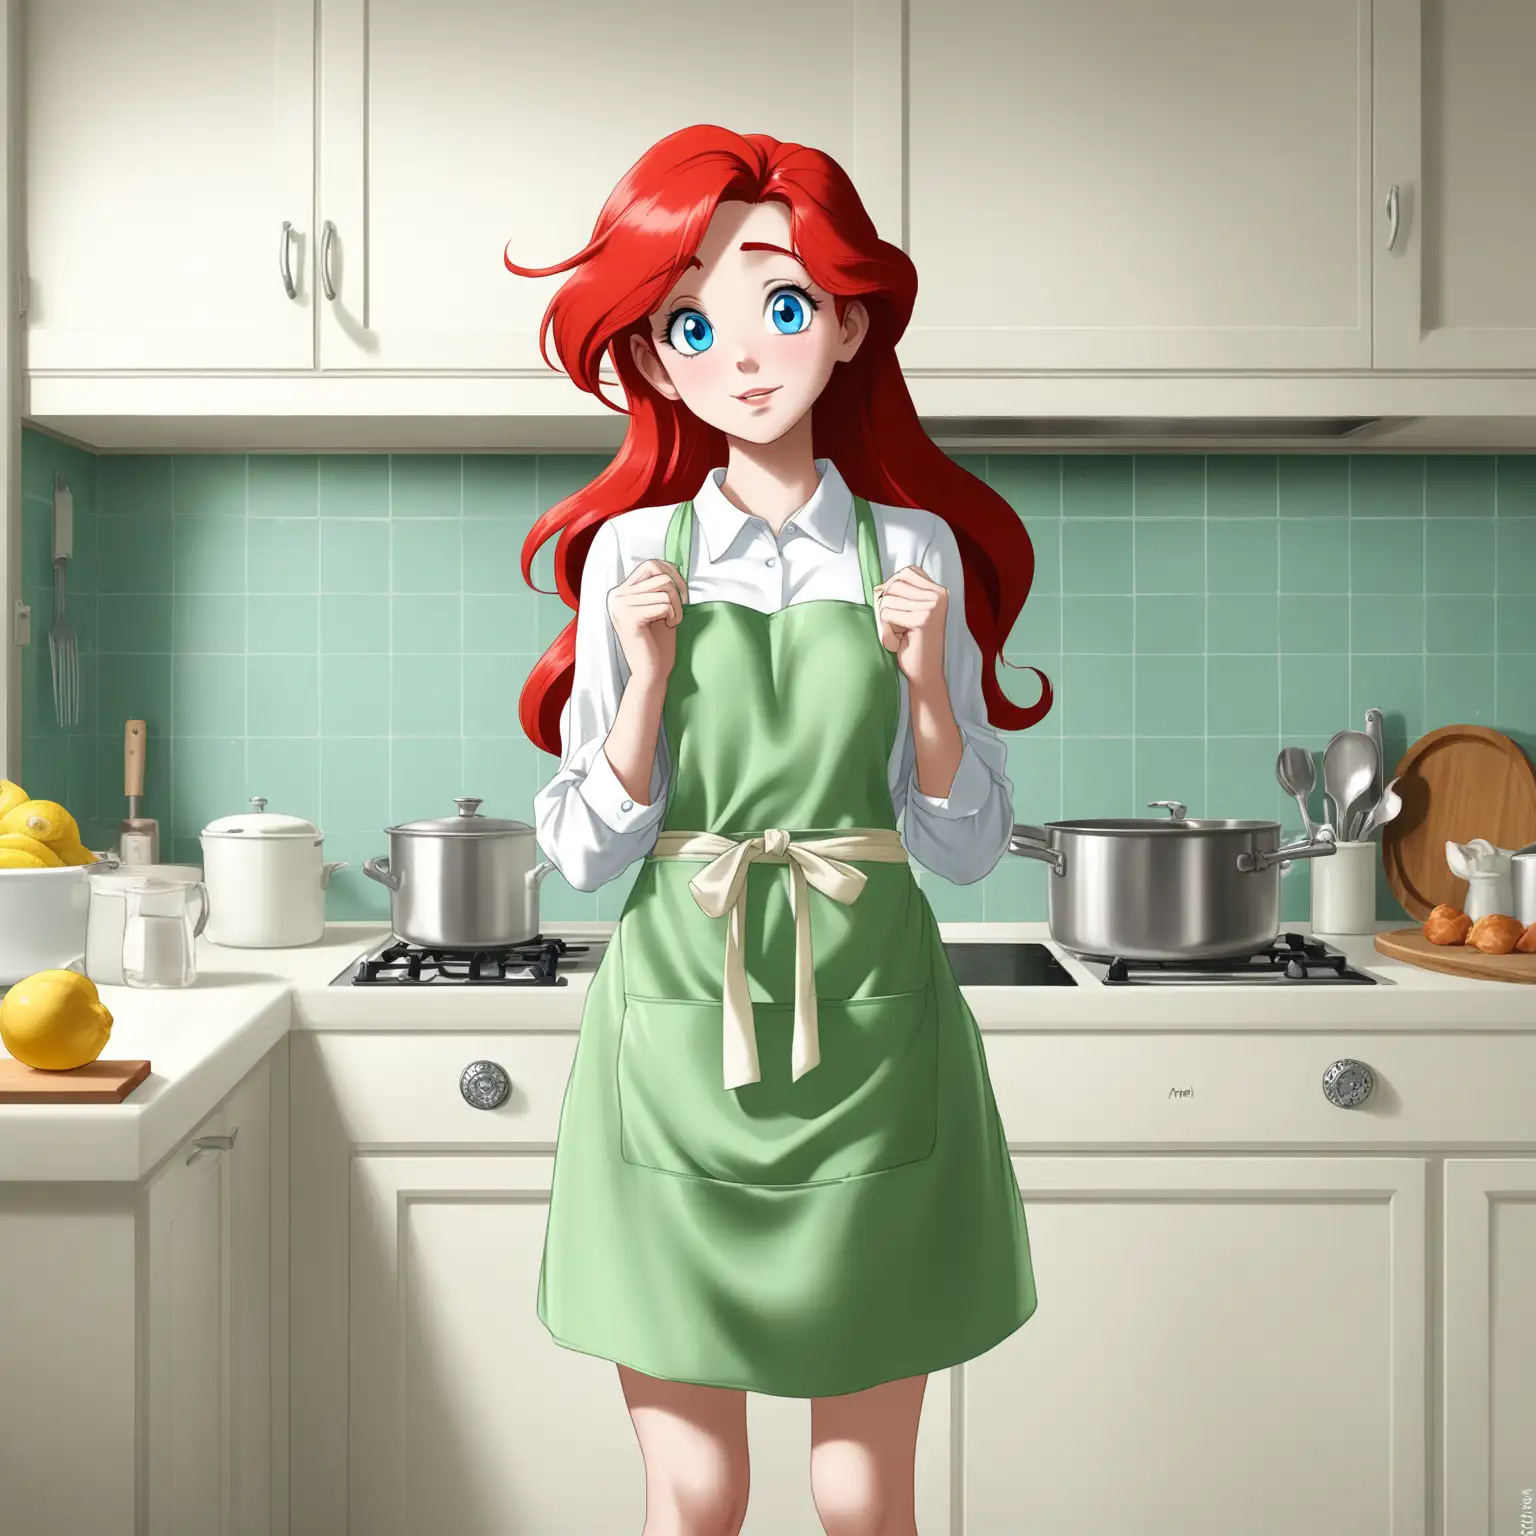 Ariel Inspired Woman Poses in Bright Kitchen Setting